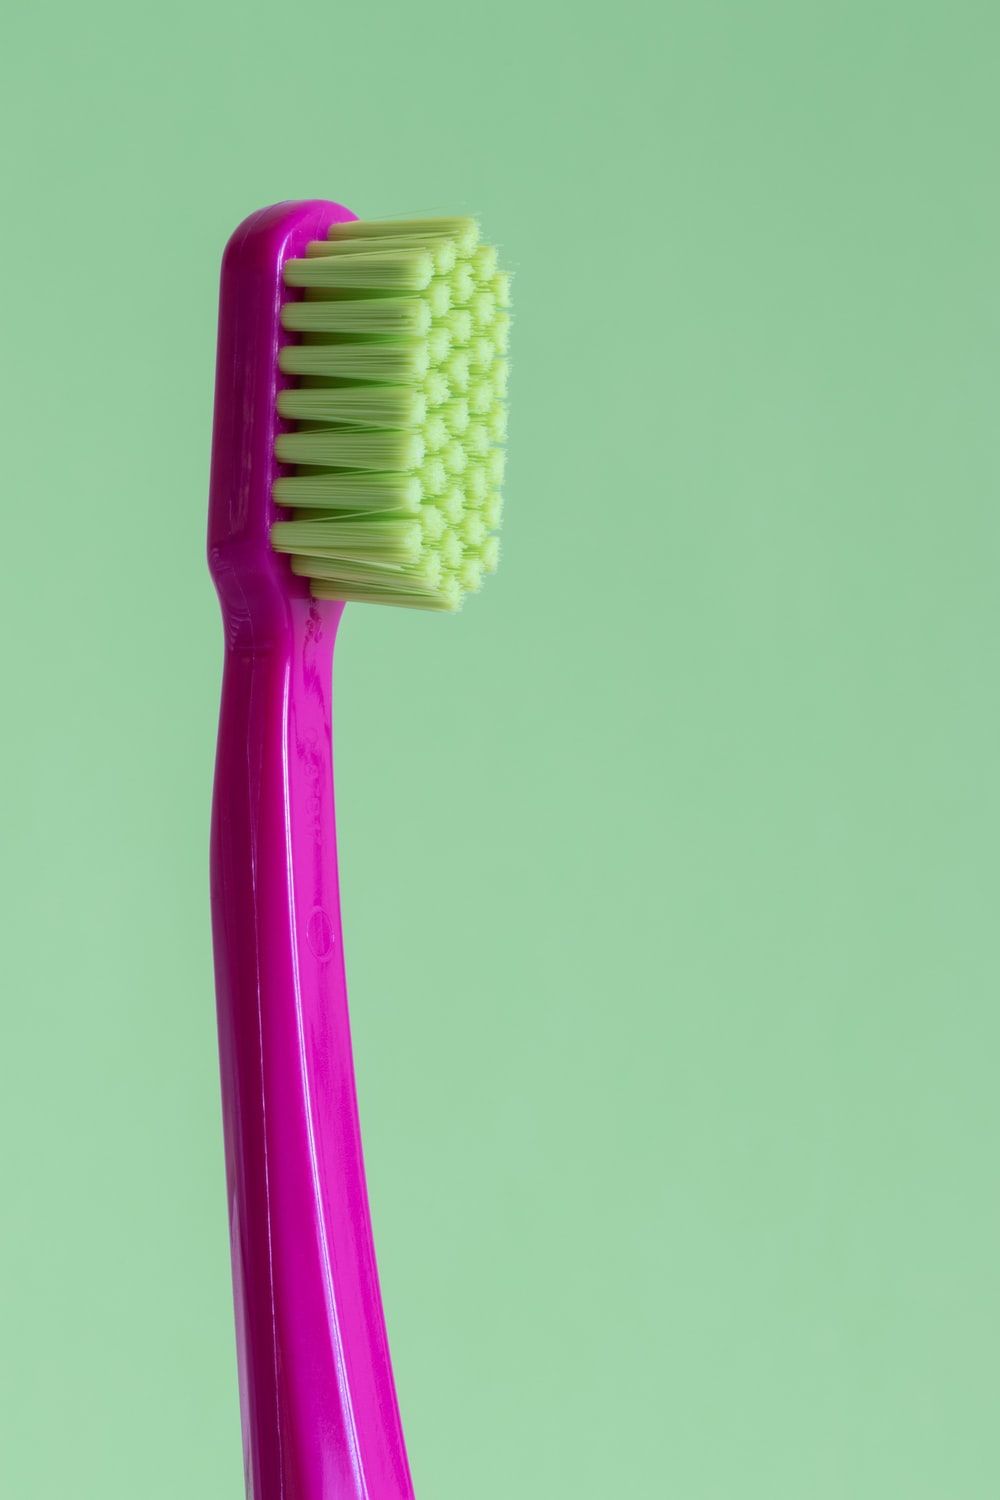 Tooth Brush Picture. Download Free Image